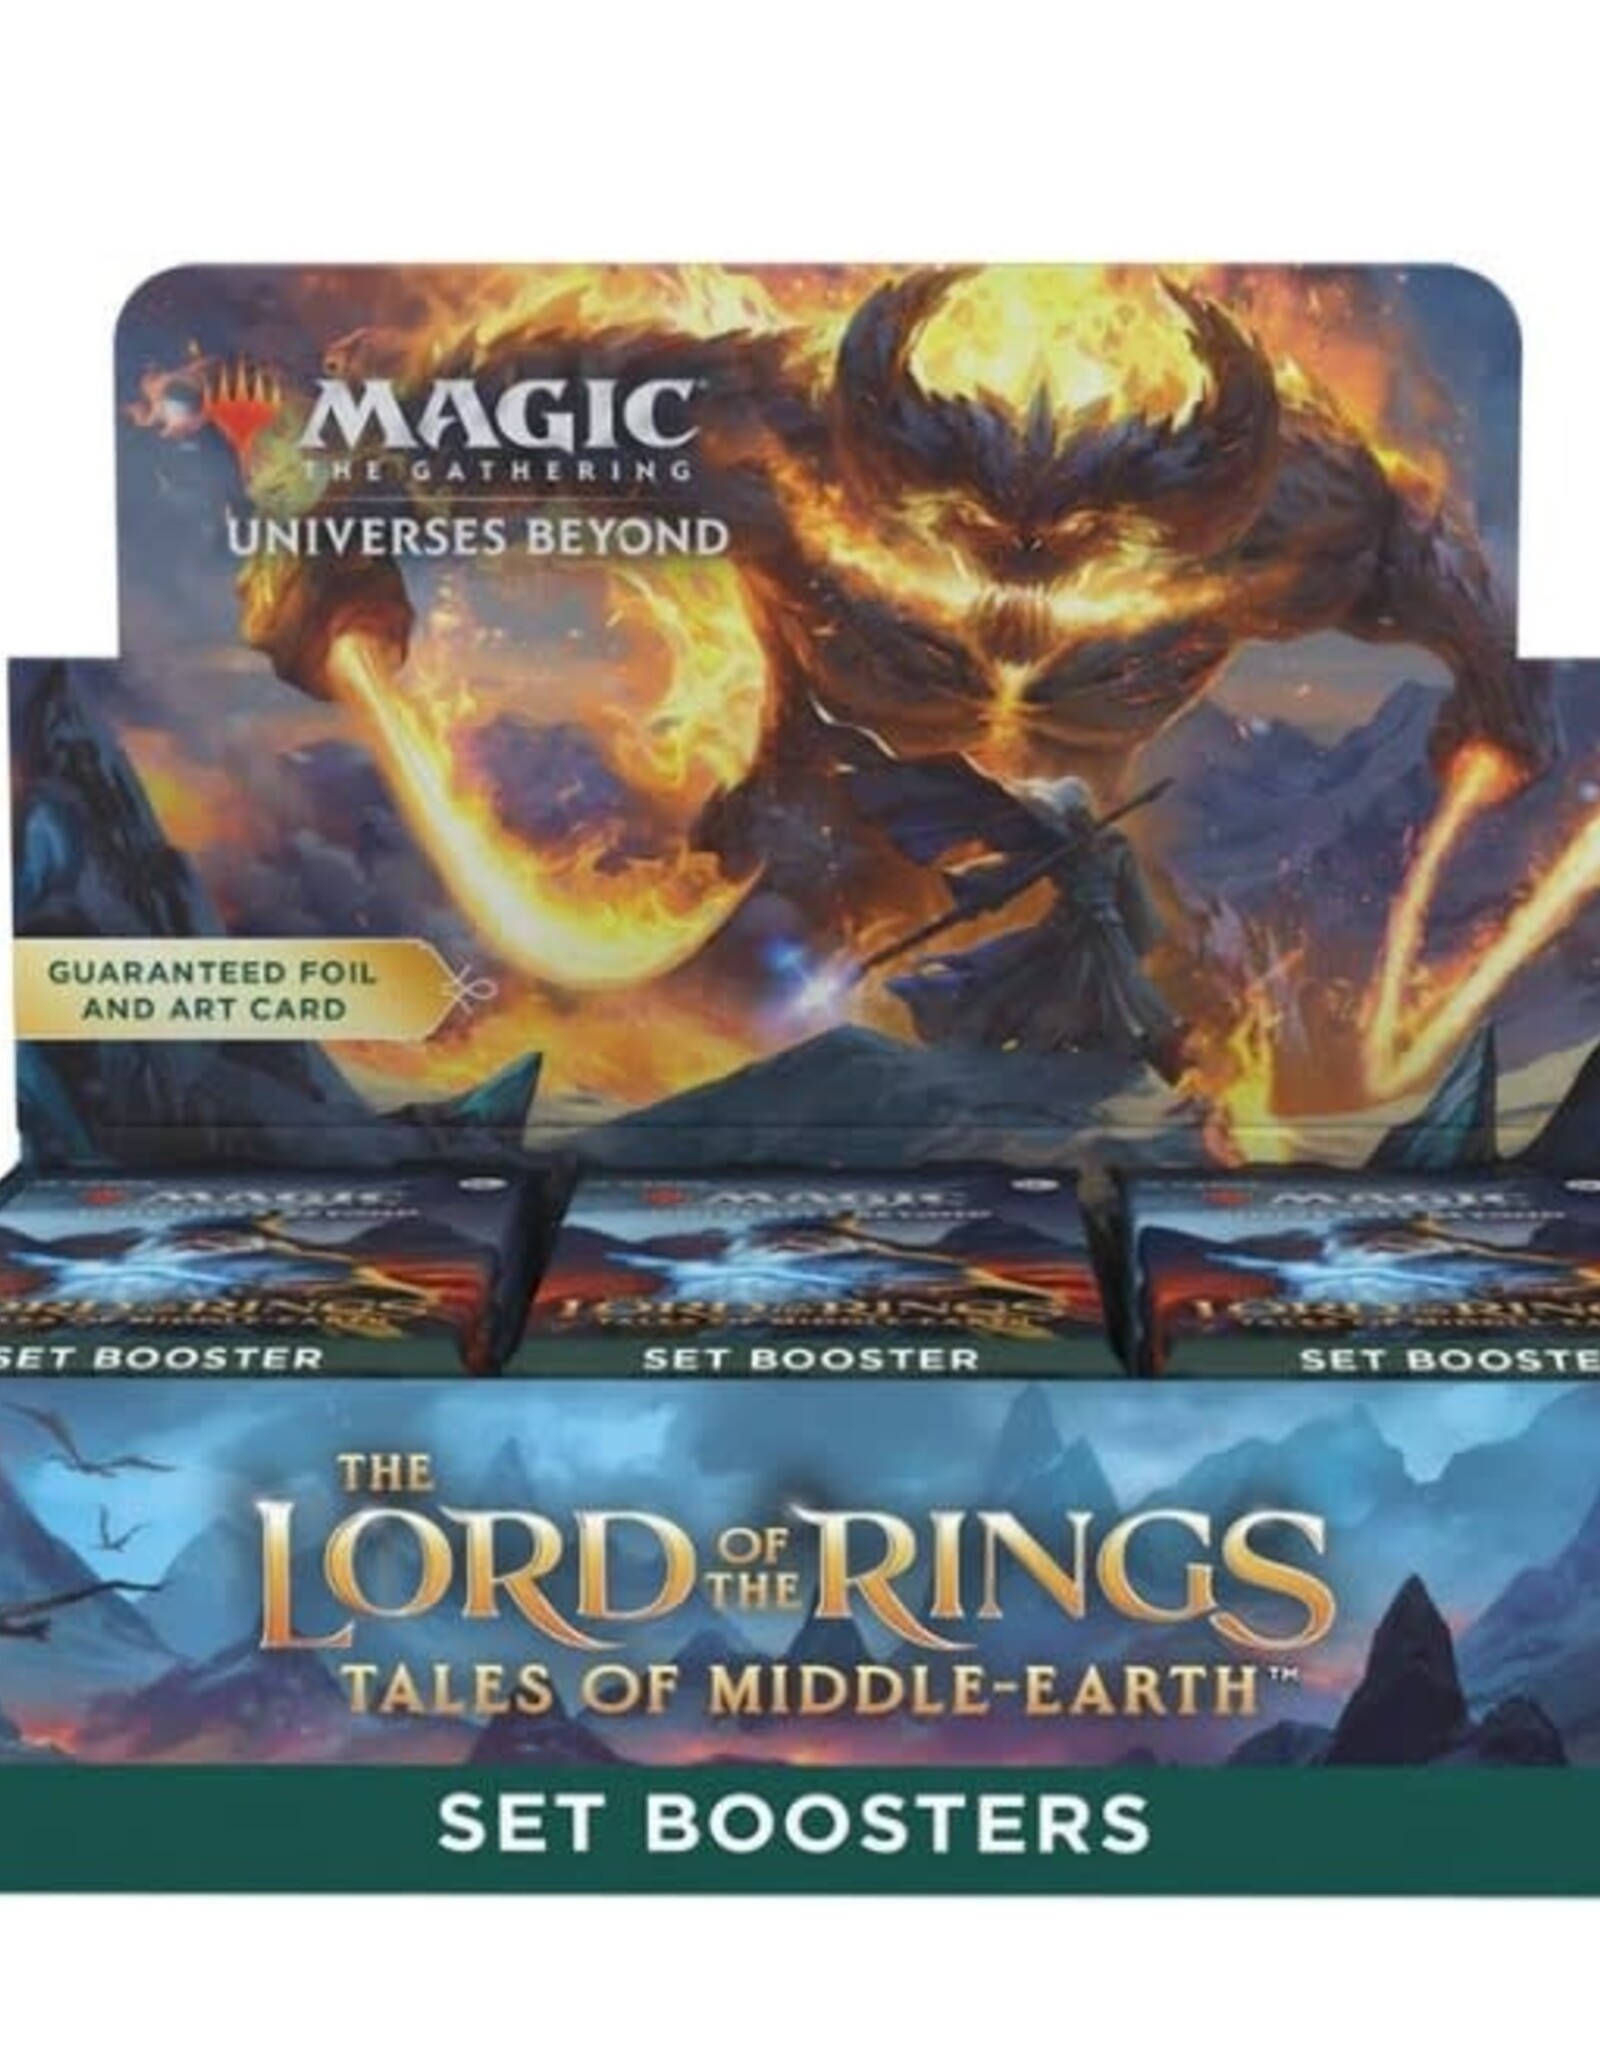 Magic the Gathering MTG Lord of the Rings - Set Booster Asst.